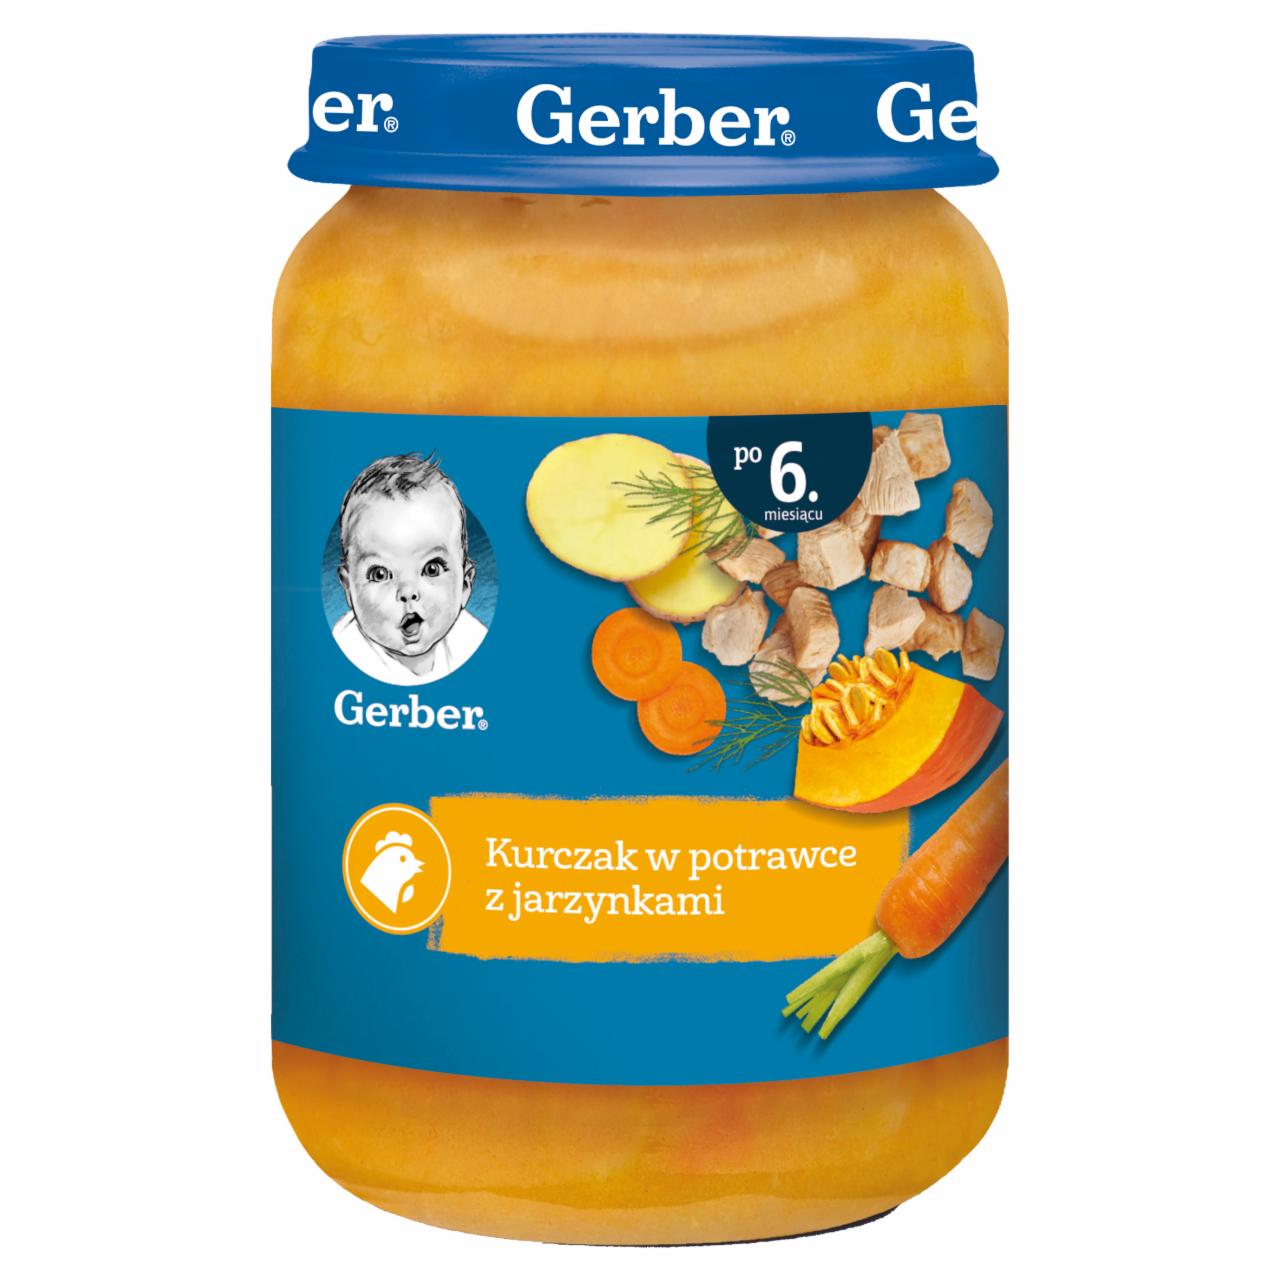 Photo - Gerber Chicken Fricassee with Vegetables foe Infants after 6. Months Onwards 190 g